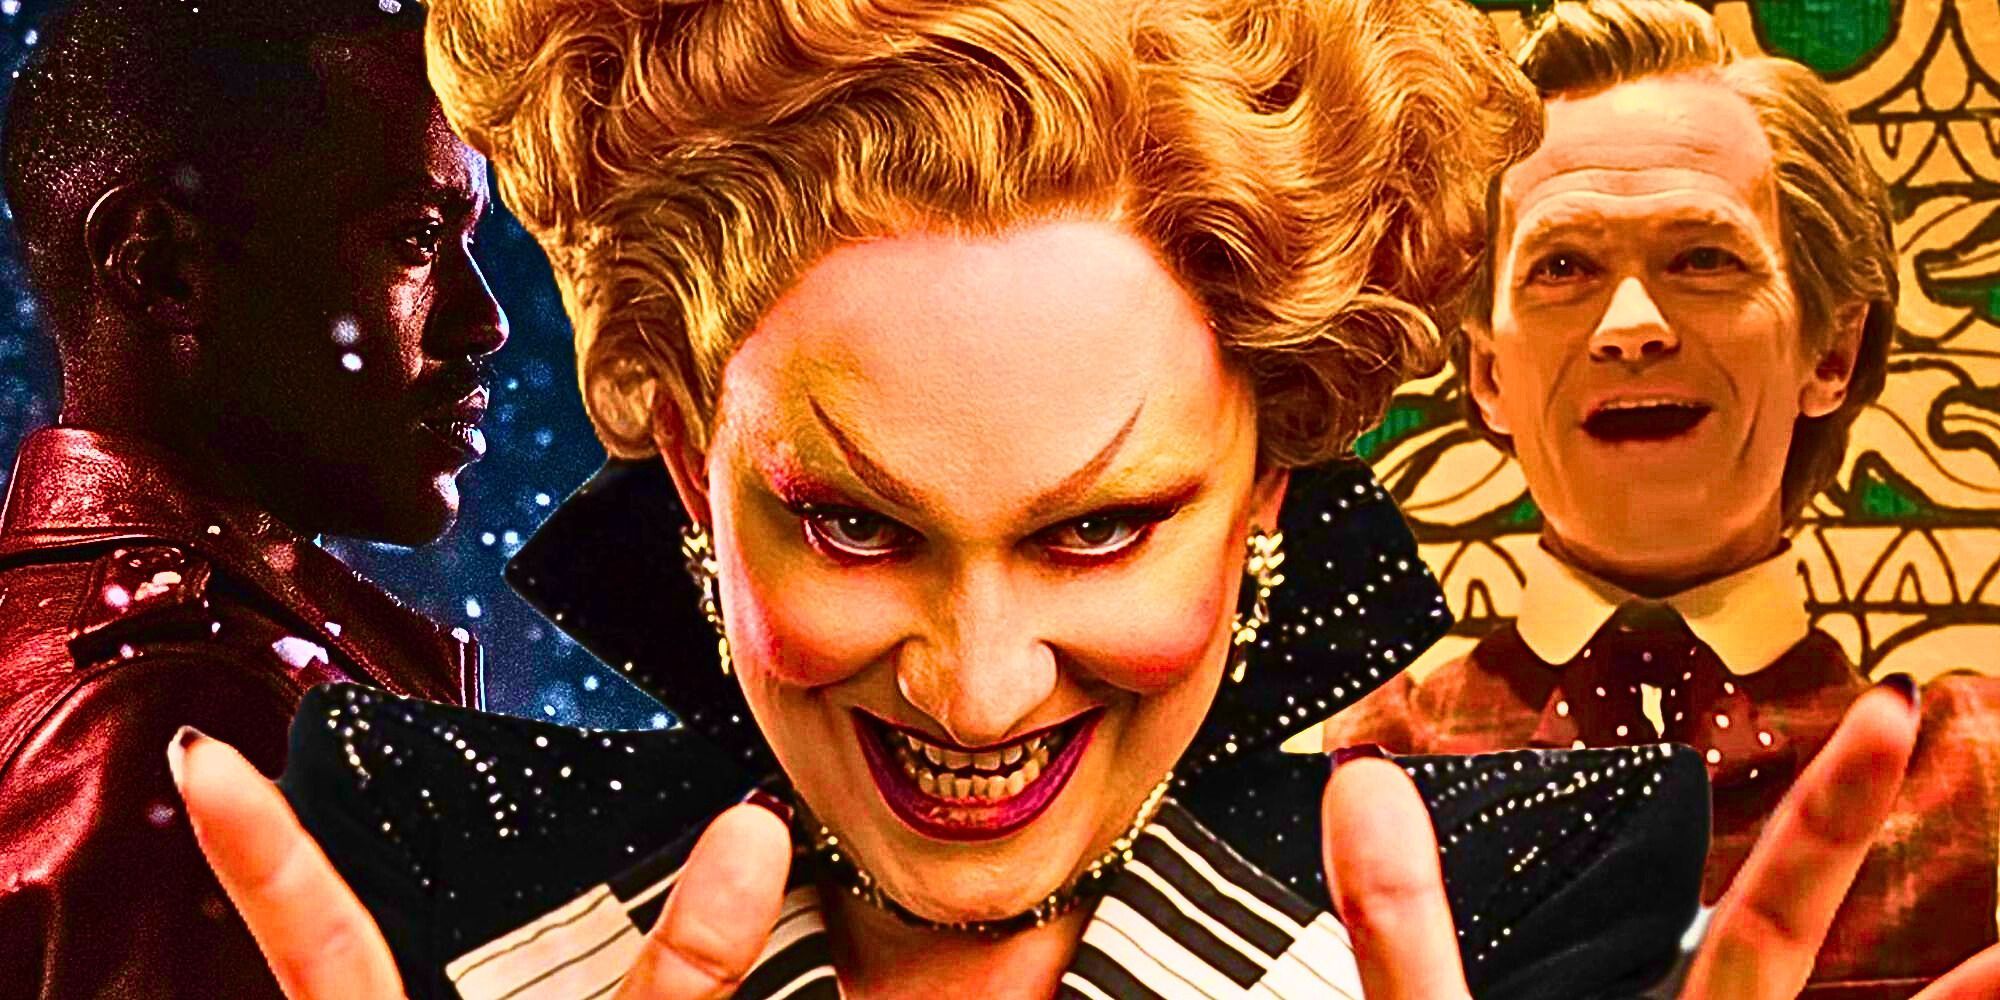 A custom image of Jinkx Monsoon in Doctor Who against a backdrop of Ncuti Gatwa's Fifteenth Doctor and Neil Patrick Harris as The Toymaker